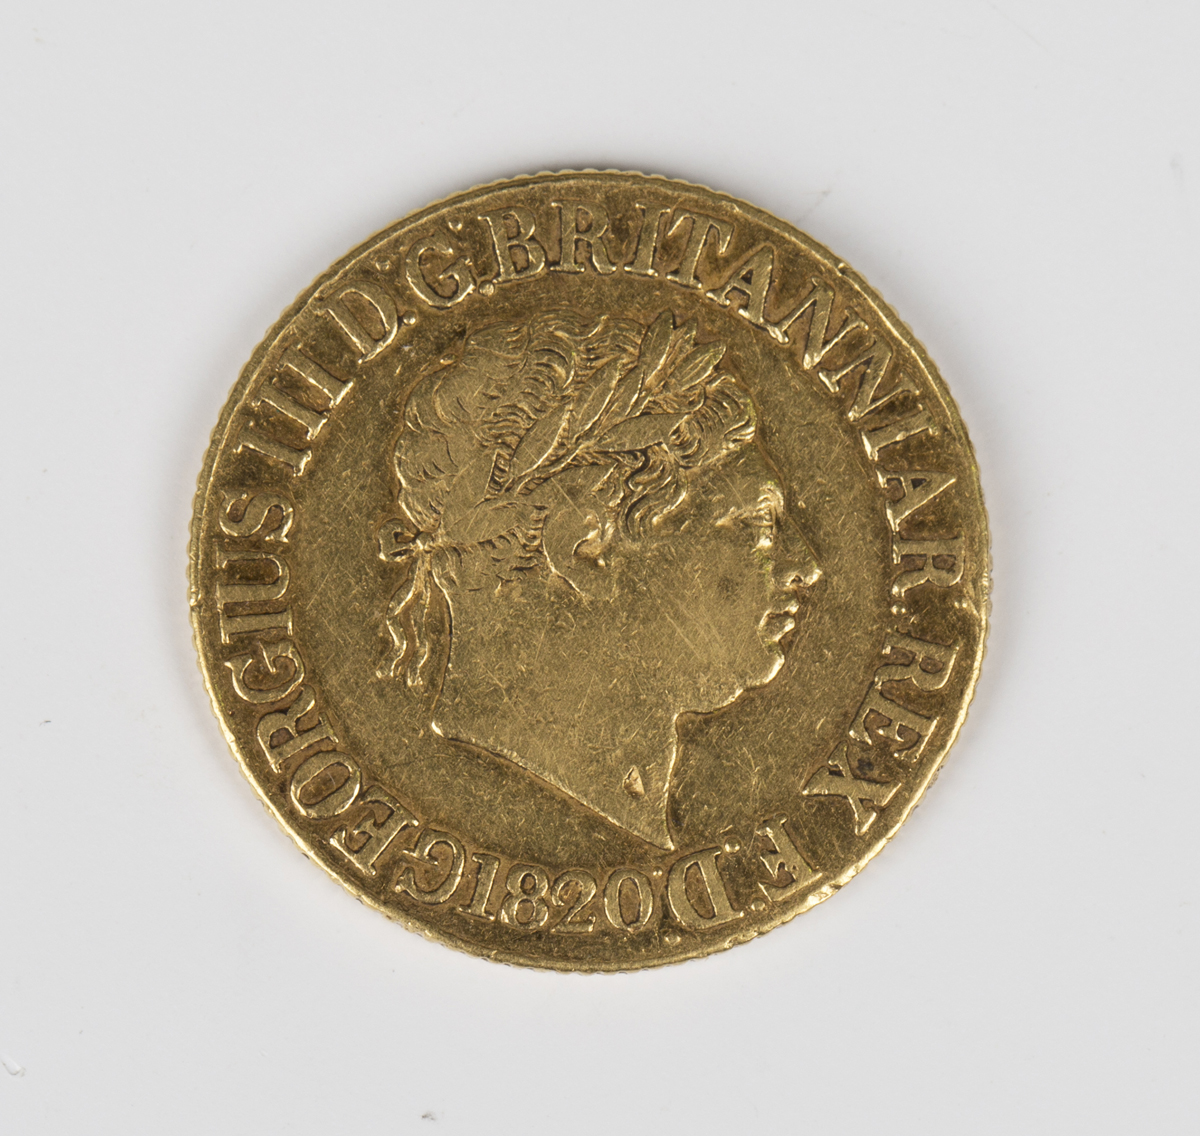 A George III sovereign 1820.Buyer’s Premium 29.4% (including VAT @ 20%) of the hammer price. Lots